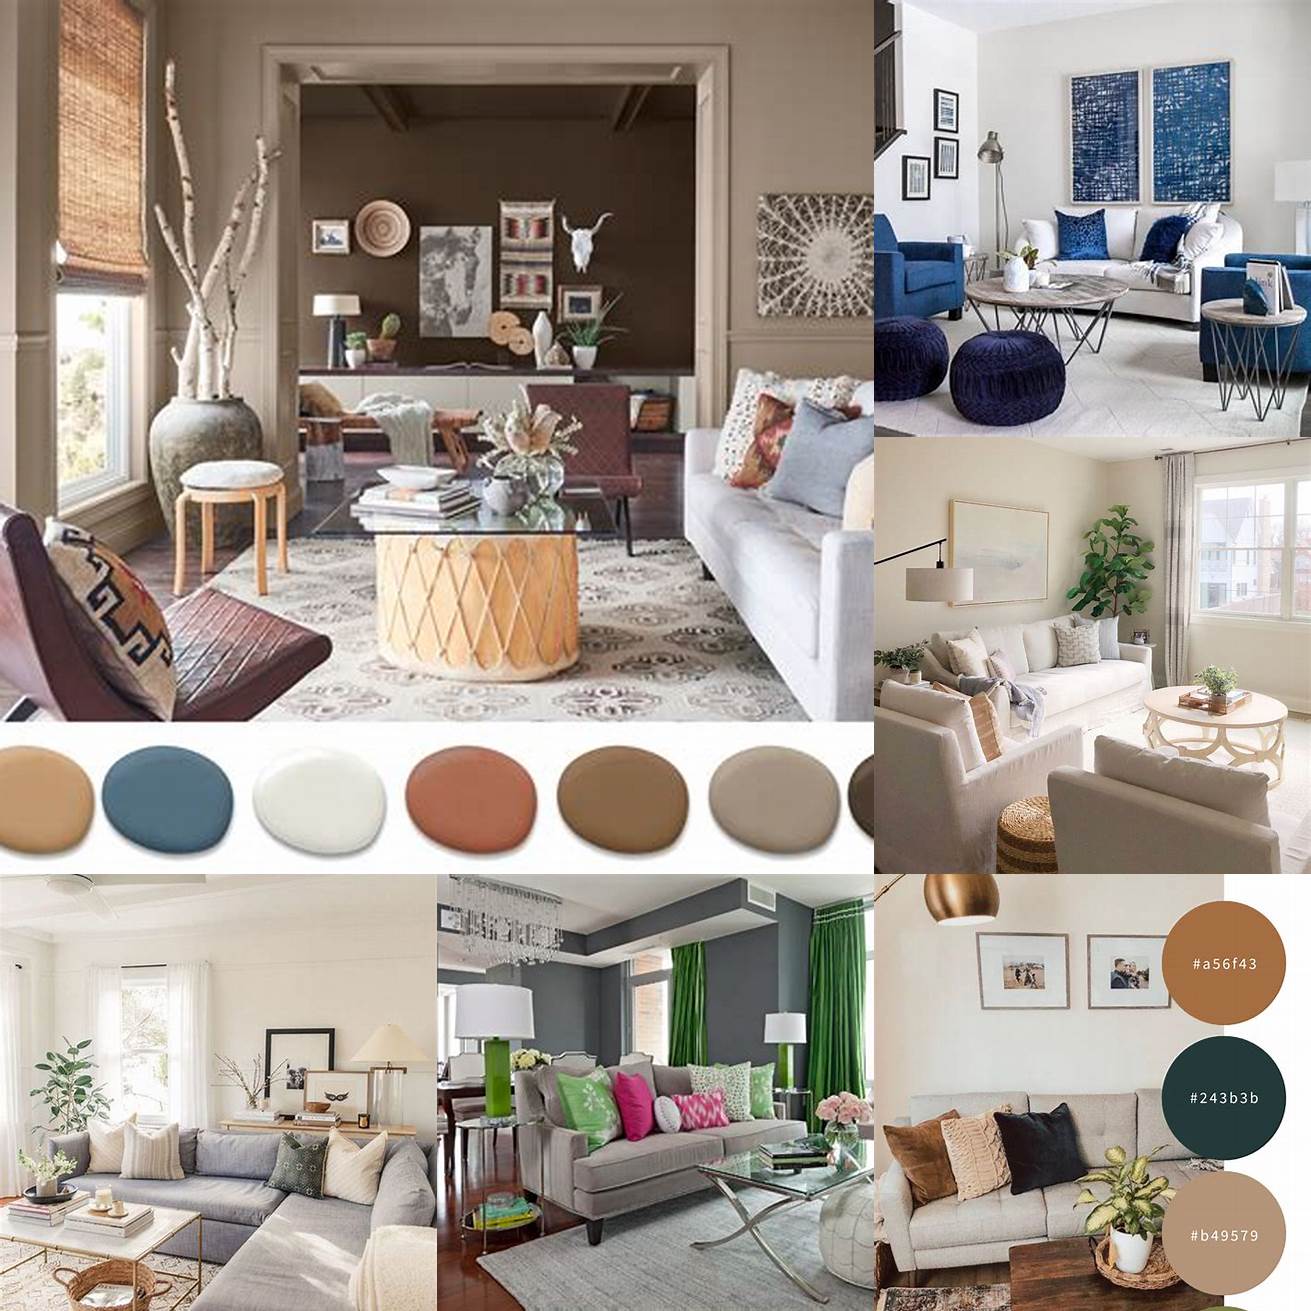 Choose a color and material that complement your existing decor If you have a neutral color palette you can add a pop of color with a bold-colored sofa If you have a lot of patterns and textures in your room a plain-colored sofa can help to balance the look